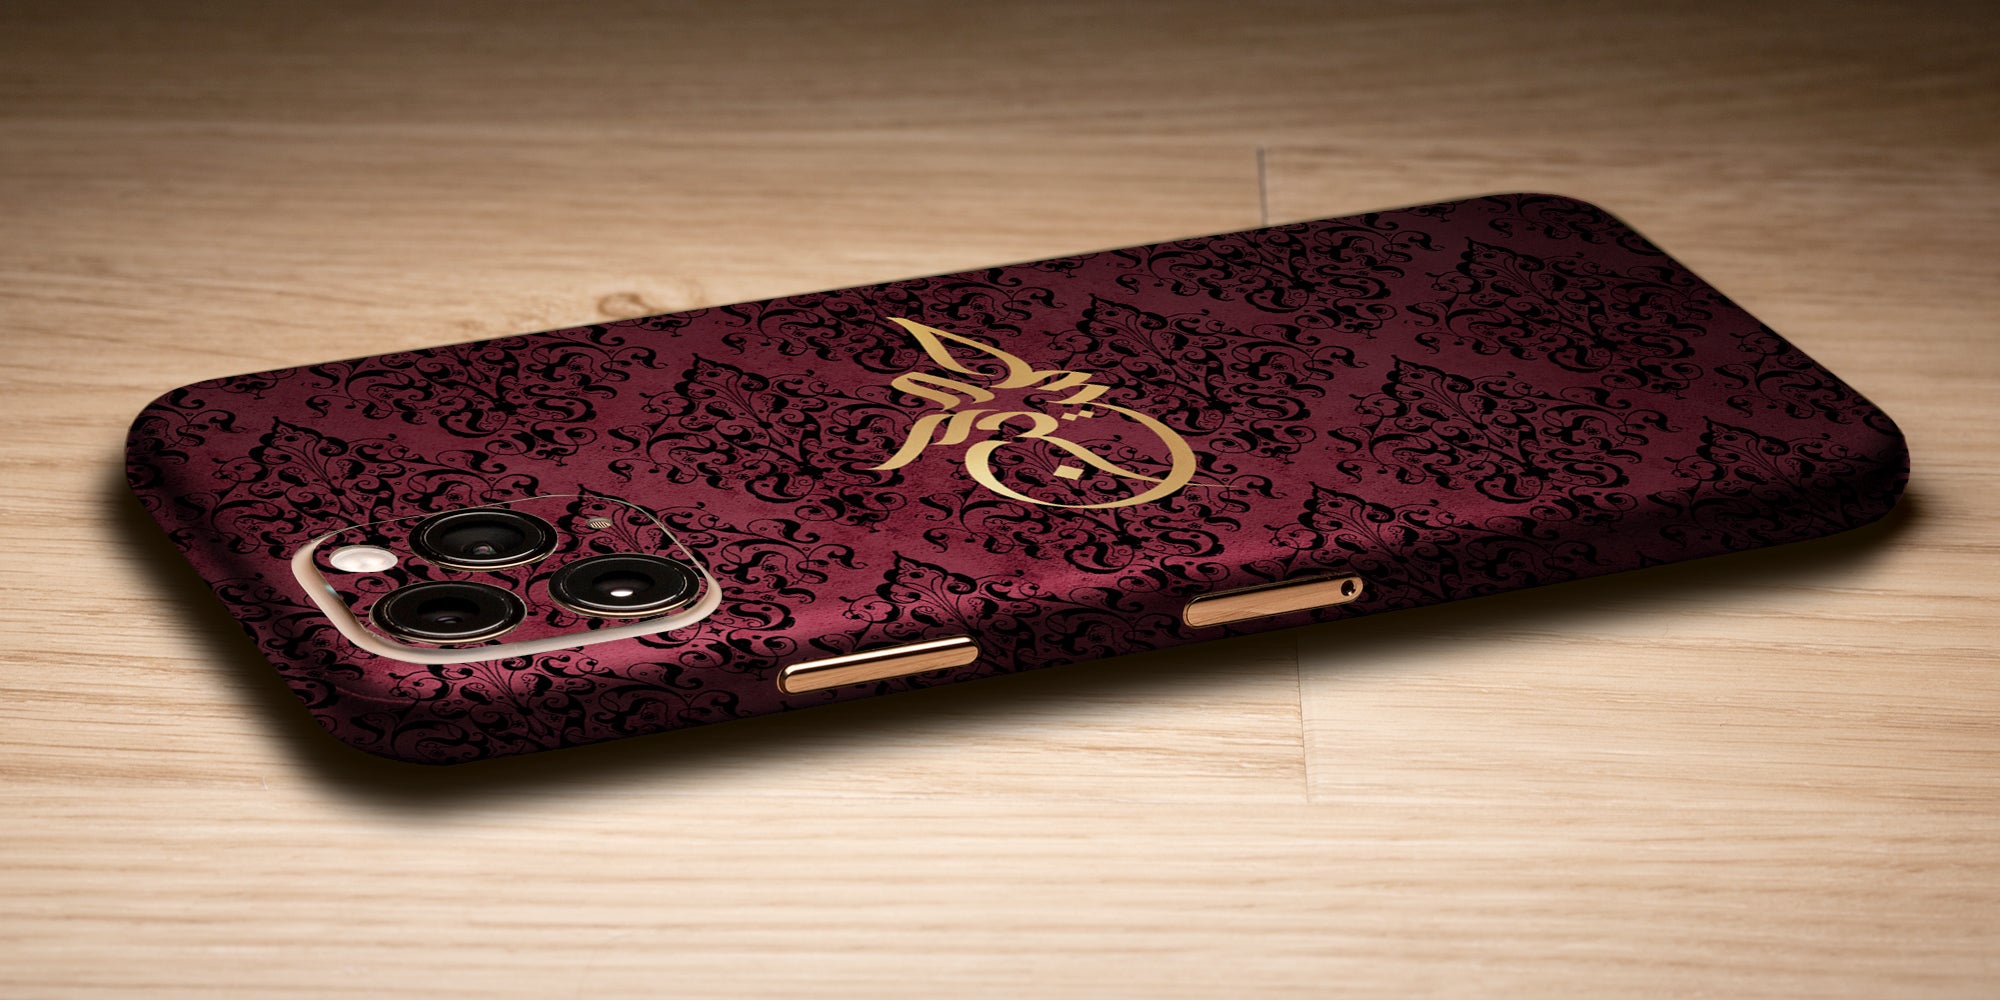 Damask Design Decal Skin With Personalised Arabic Name Phone Wrap - Wine